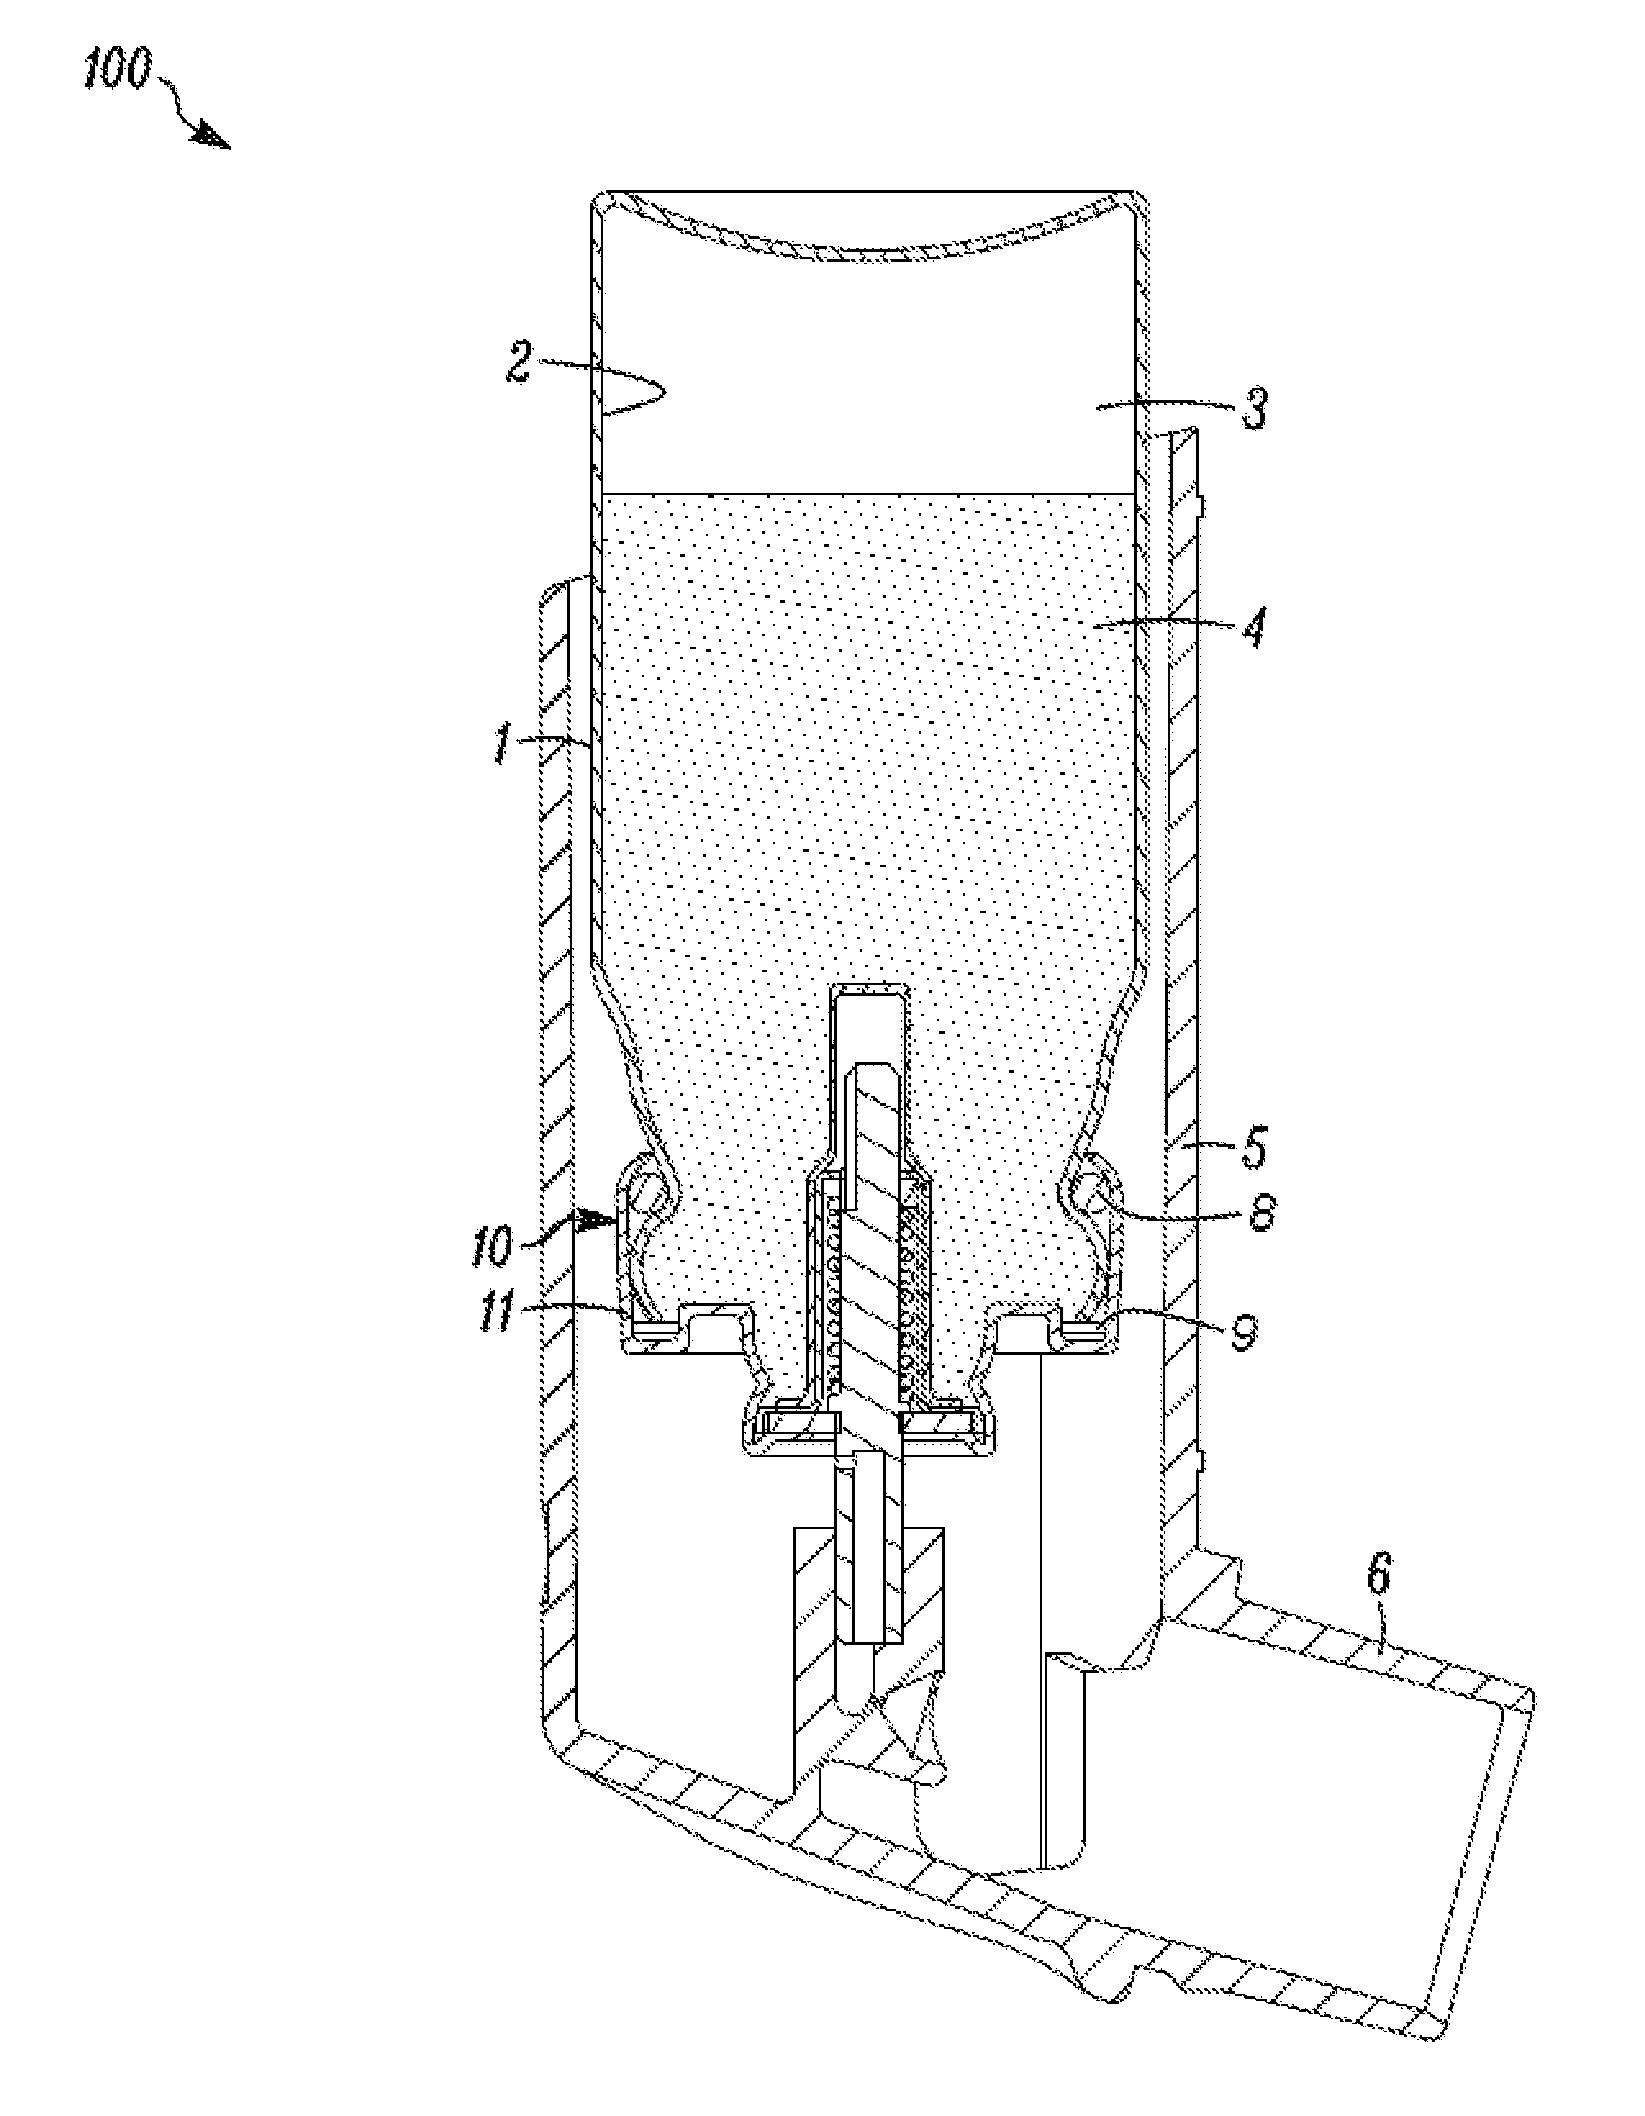 Medicinal inhalation devices and components thereof